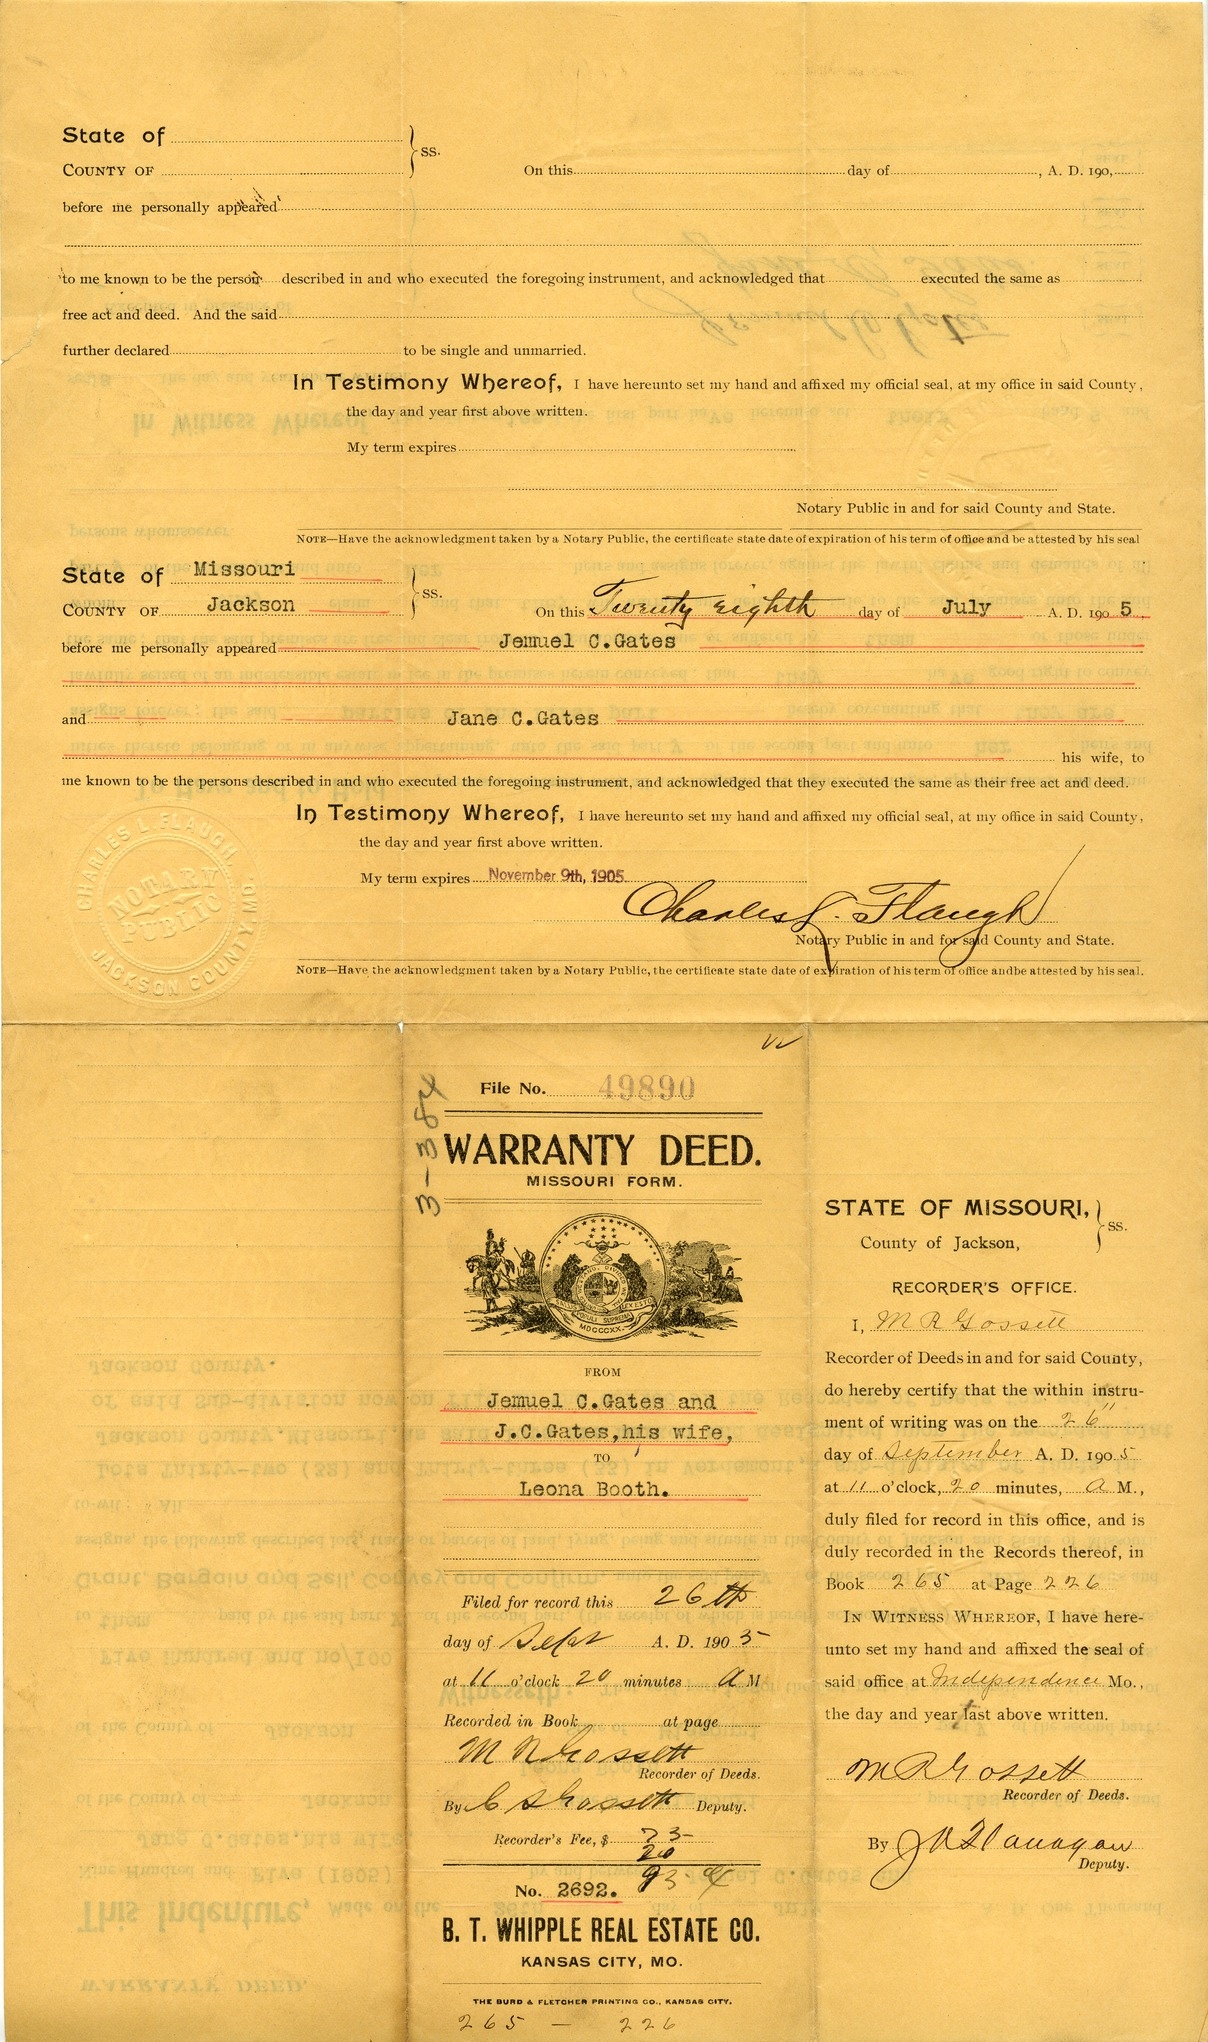 Warranty Deed from Jemuel C. Gates and J. C. Gates to Leona Booth